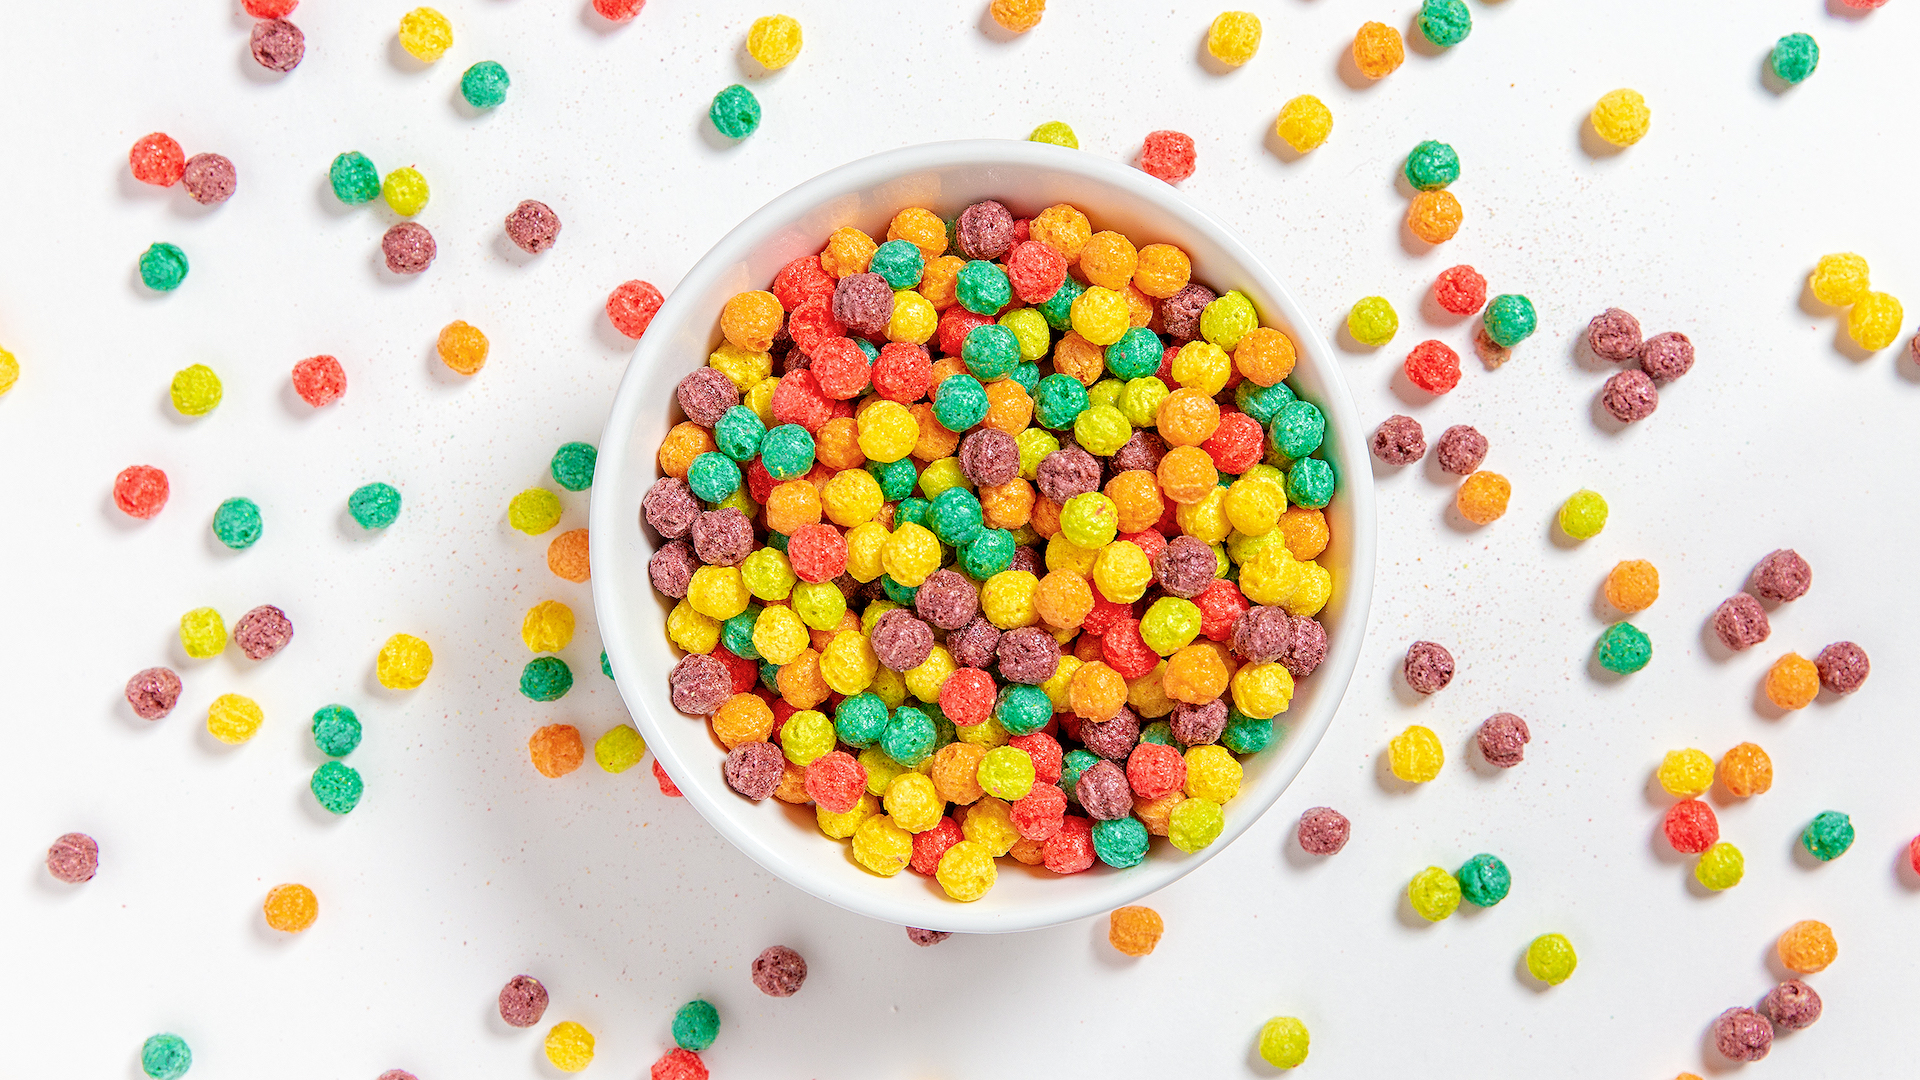 Colourful breakfast cereal